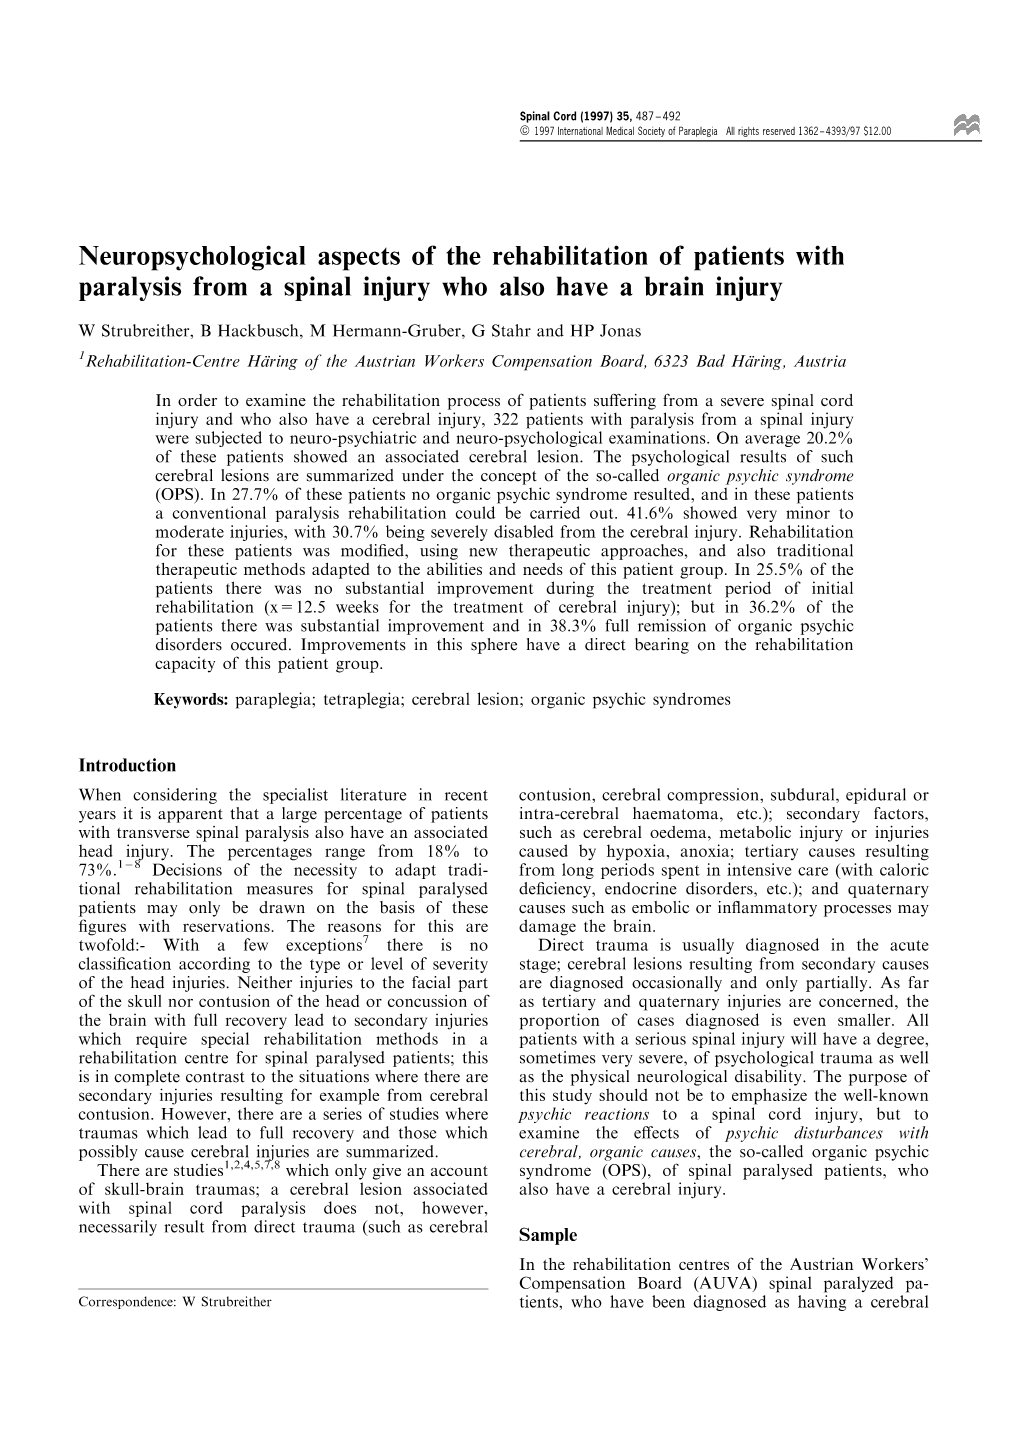 Neuropsychological Aspects of the Rehabilitation of Patients with Paralysis from a Spinal Injury Who Also Have a Brain Injury